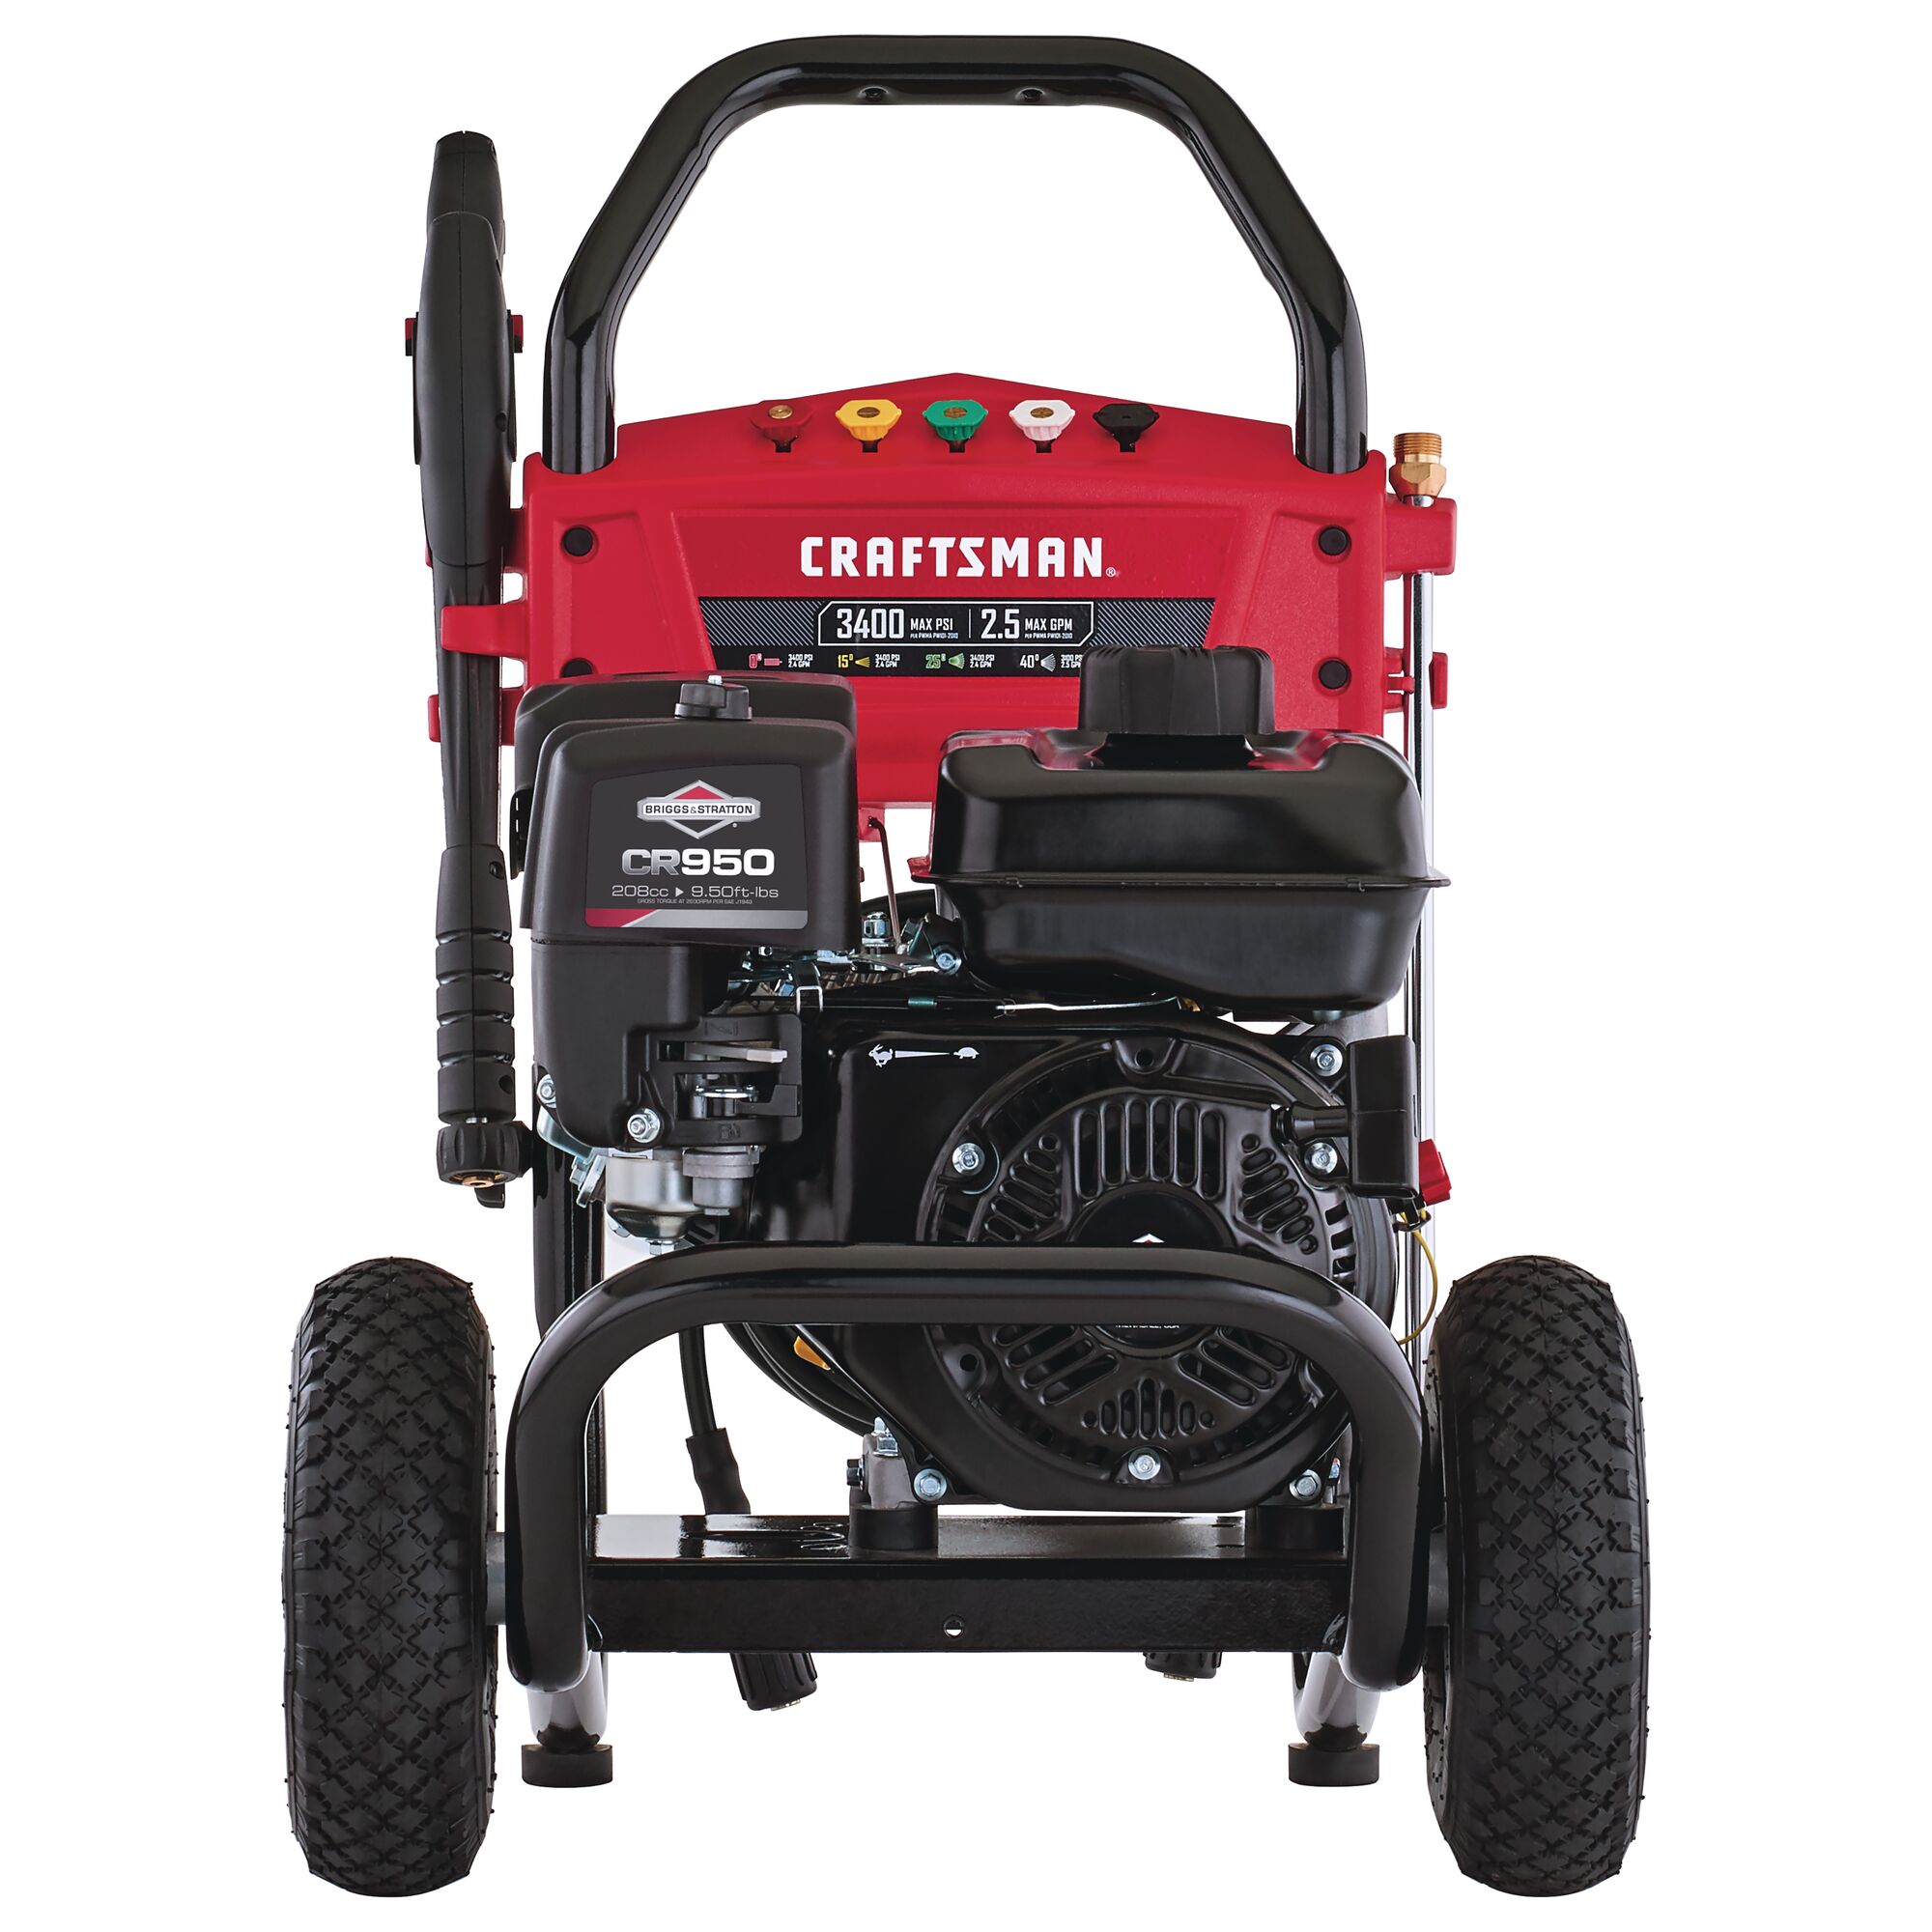 3400 MAX Pounds per Square Inch or 2 and five tenths MAX Gallons Per Minute Pressure Washer.